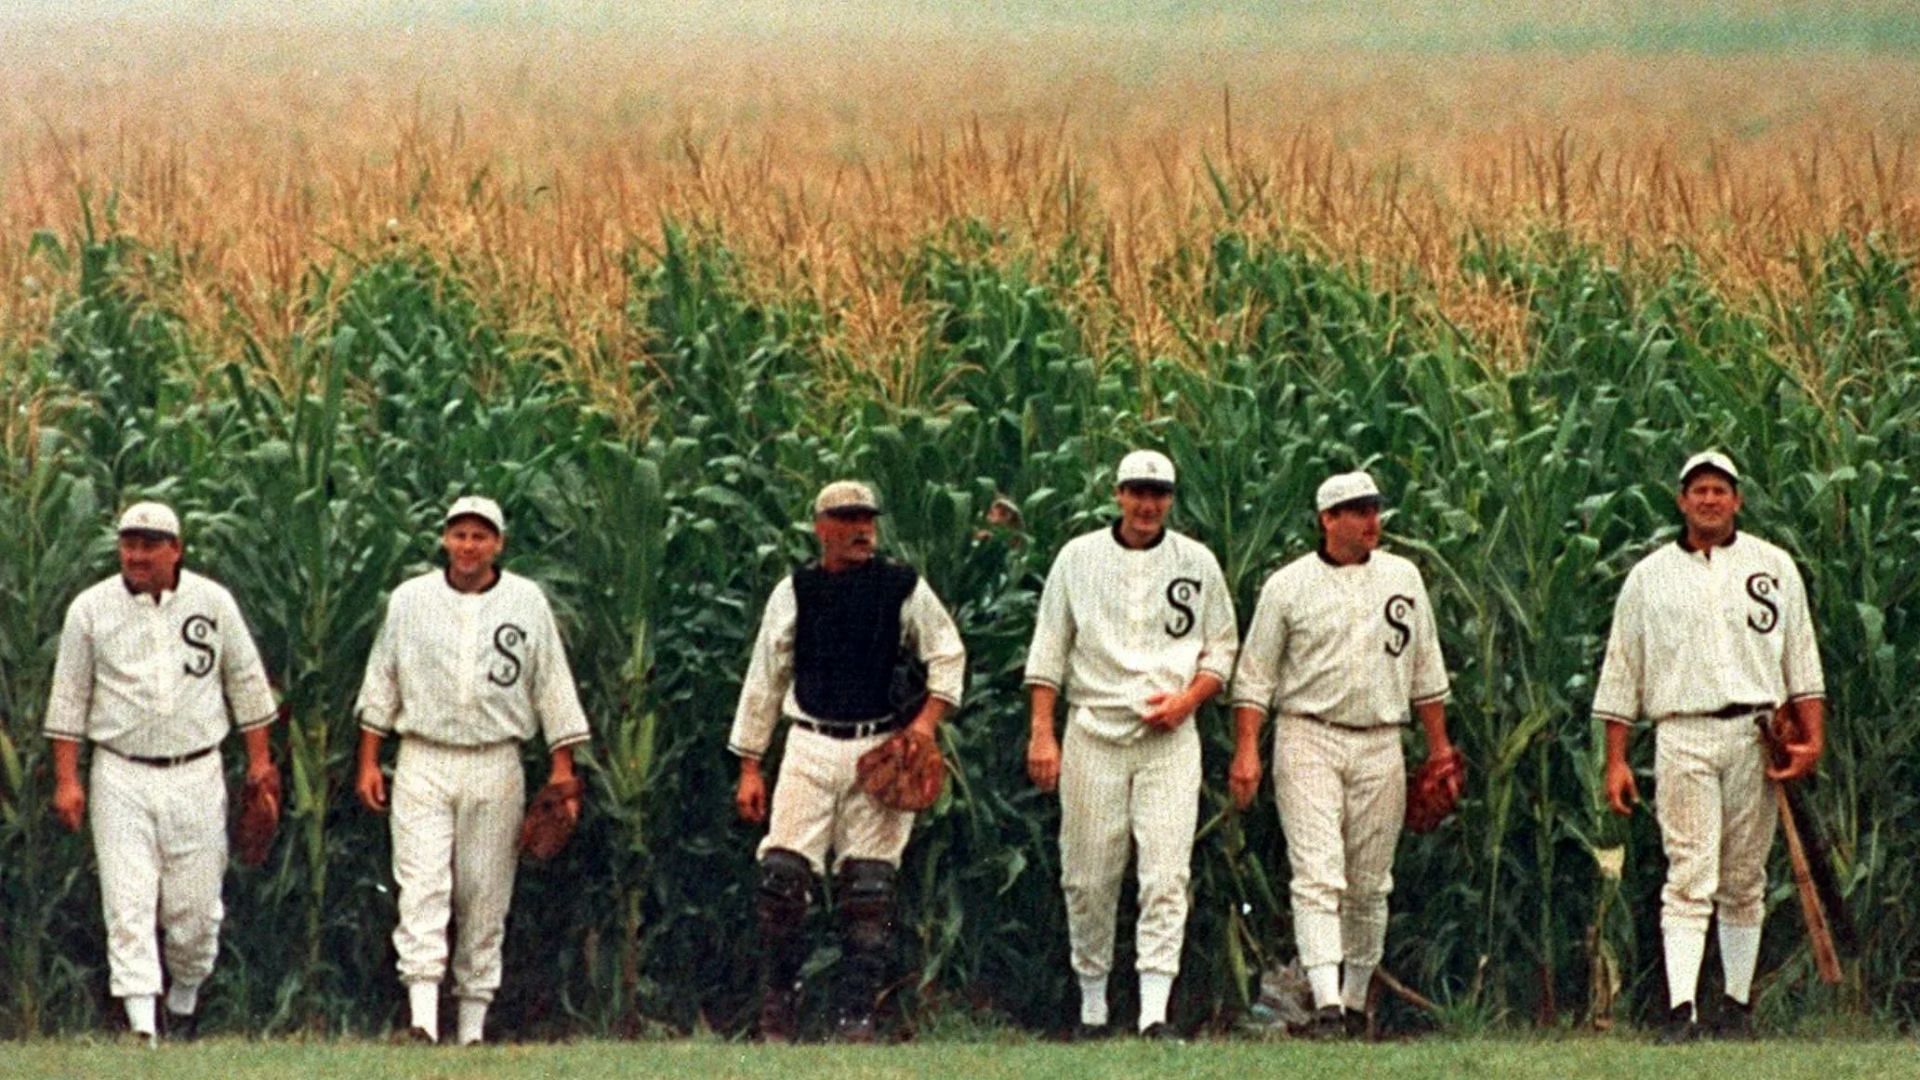 A scene from the &quot;Field of Dreams&quot; movie